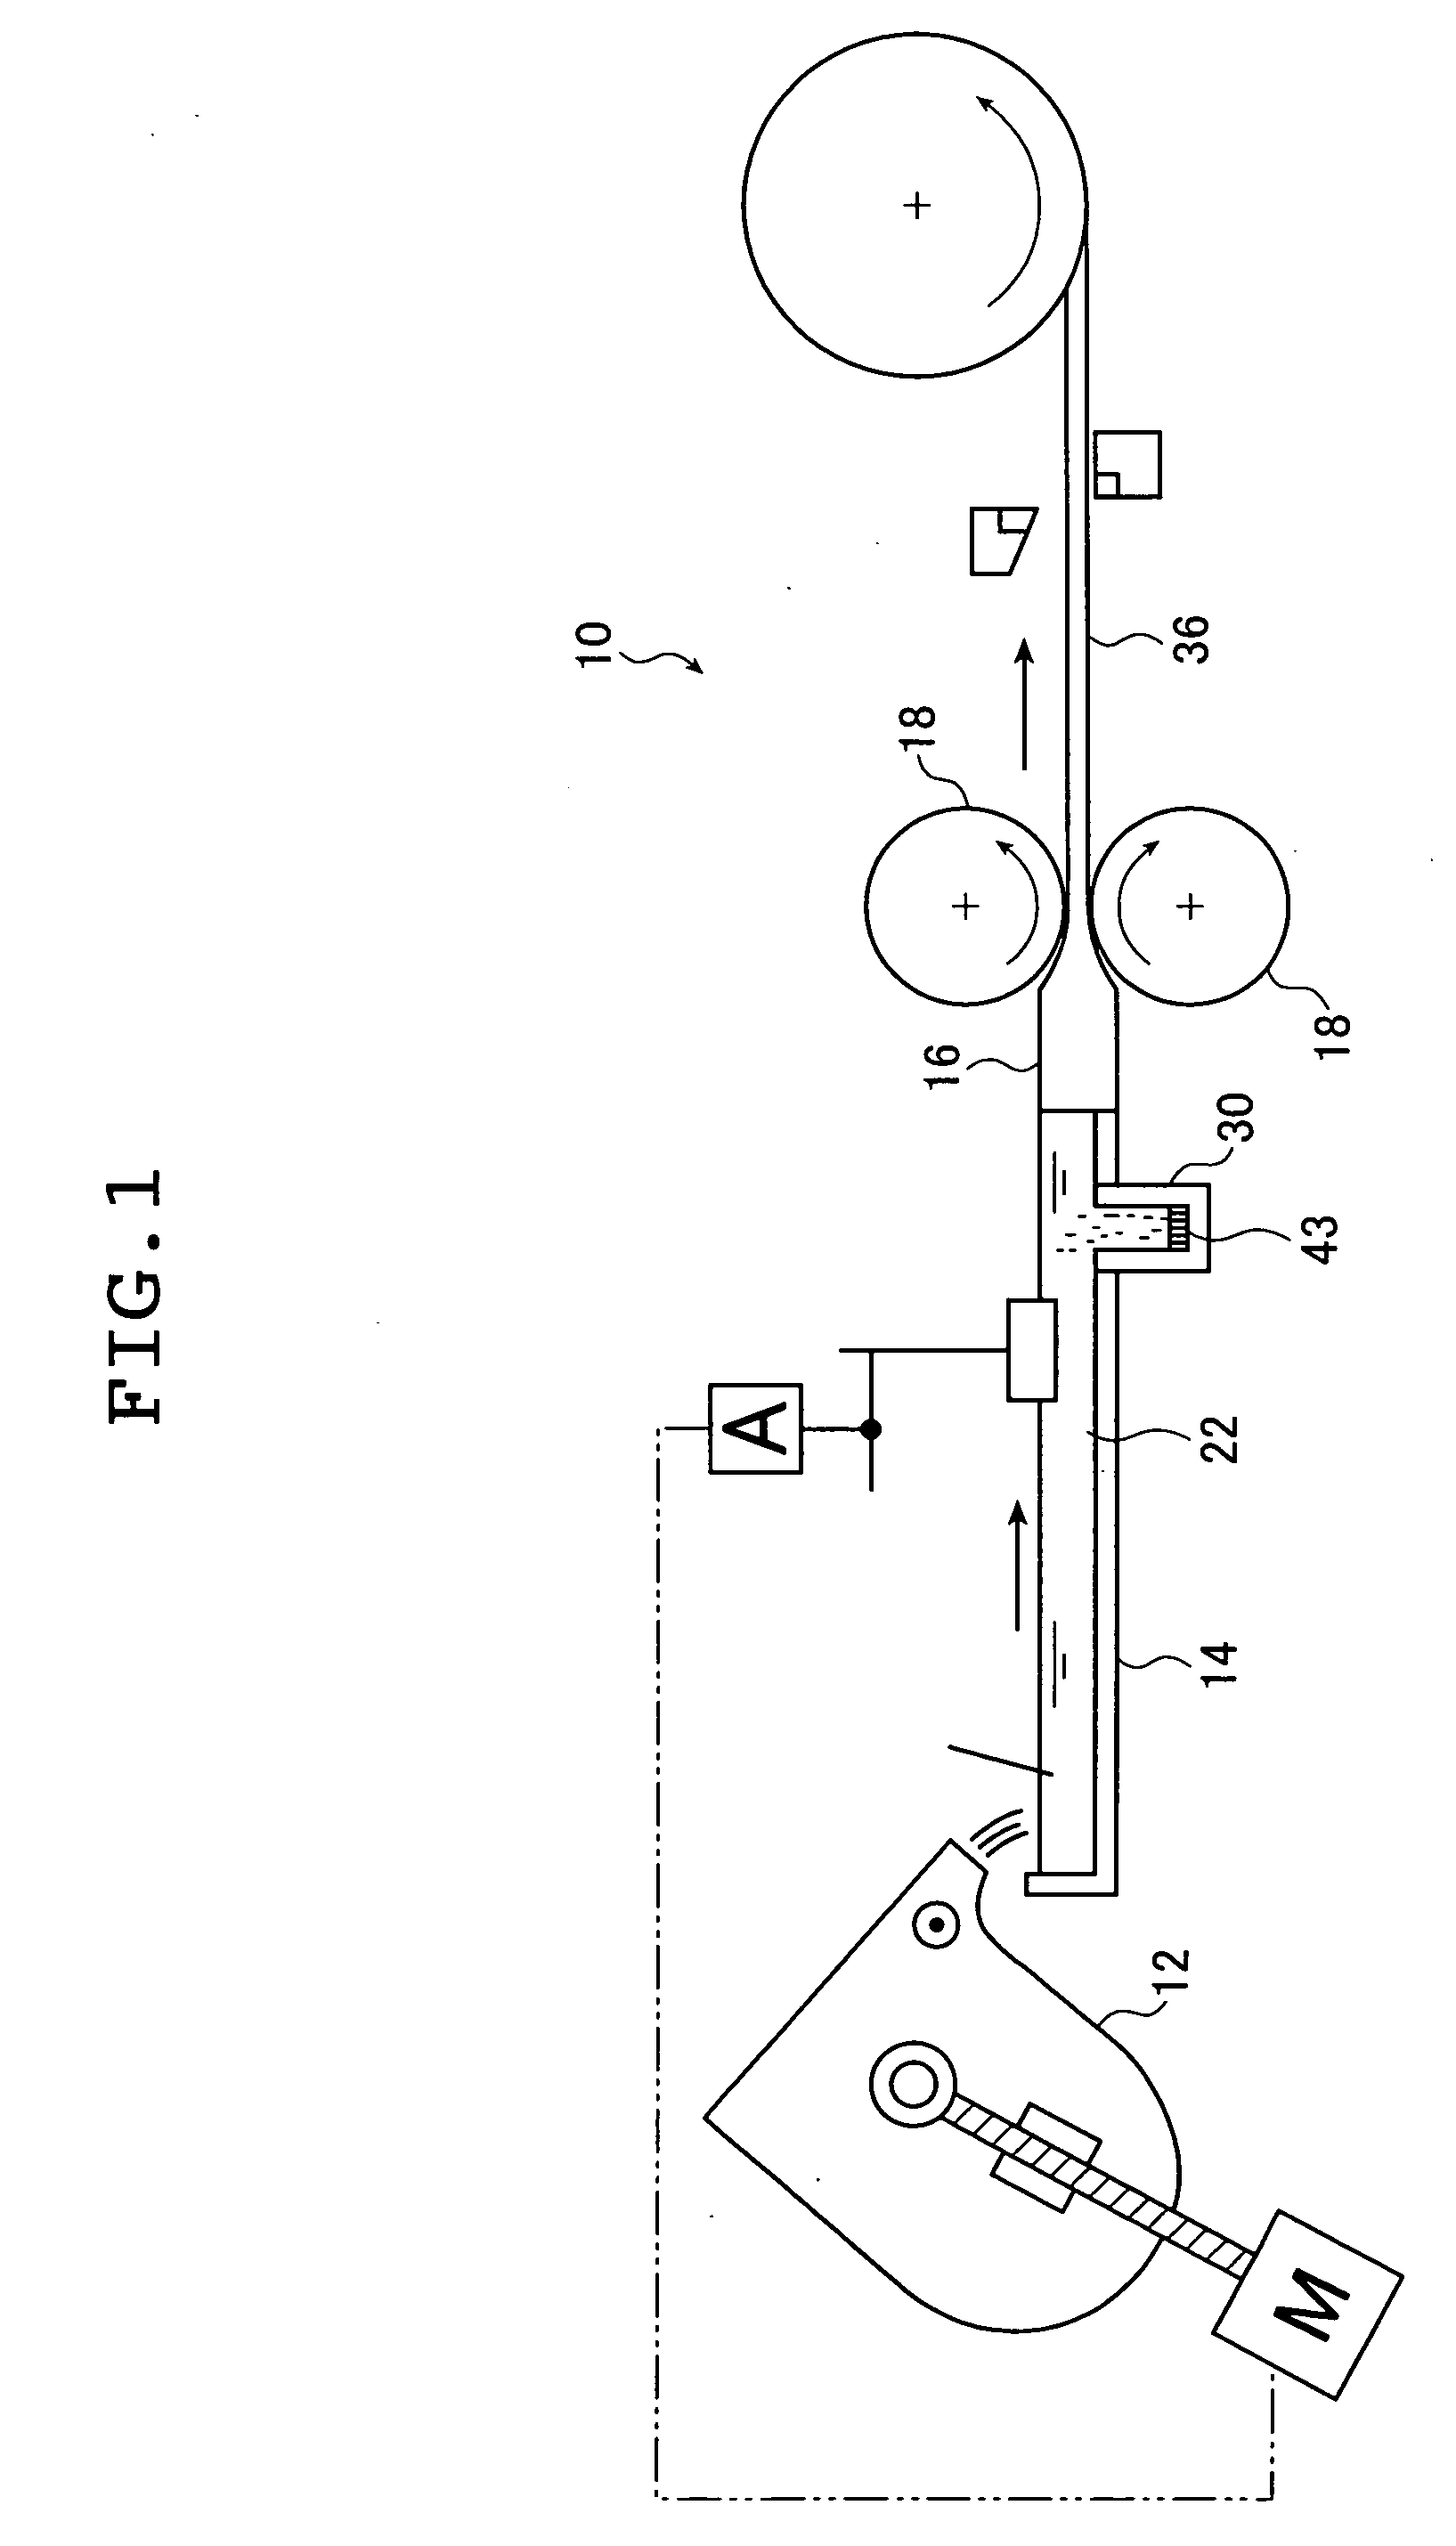 Lithographic printing plate support, method of manufacturing the same, and presensitized plate